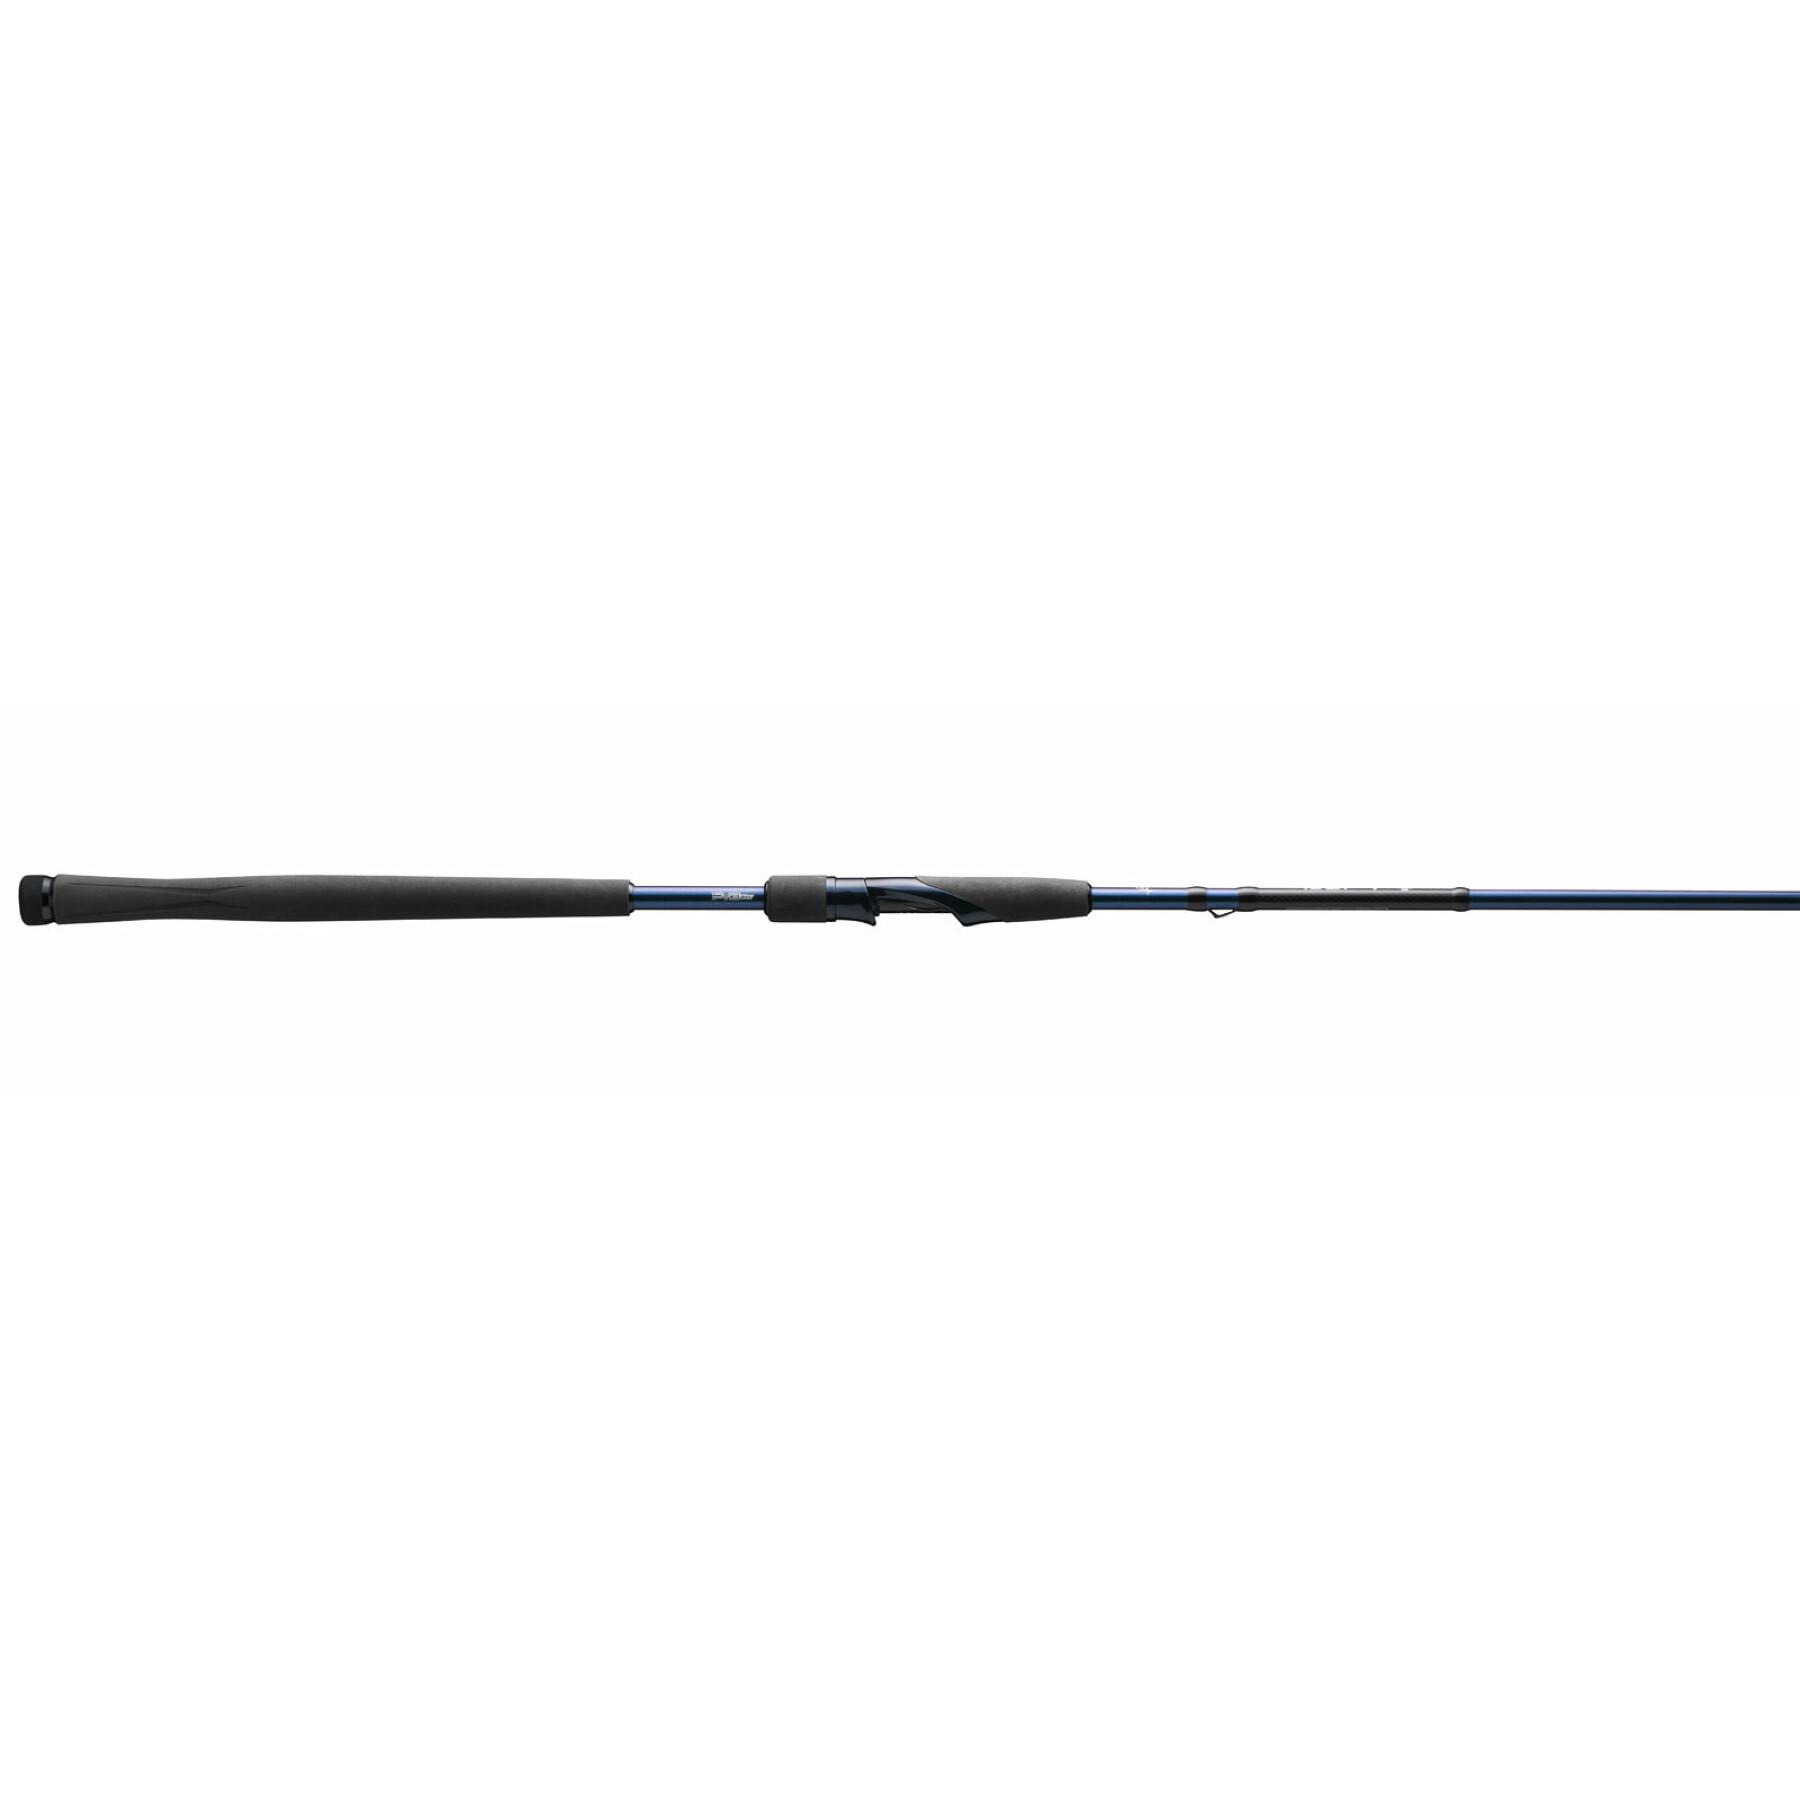 Cane 13 Fishing Defy S Spin 2,18m 15-40g - Rods - Sea - Fishing